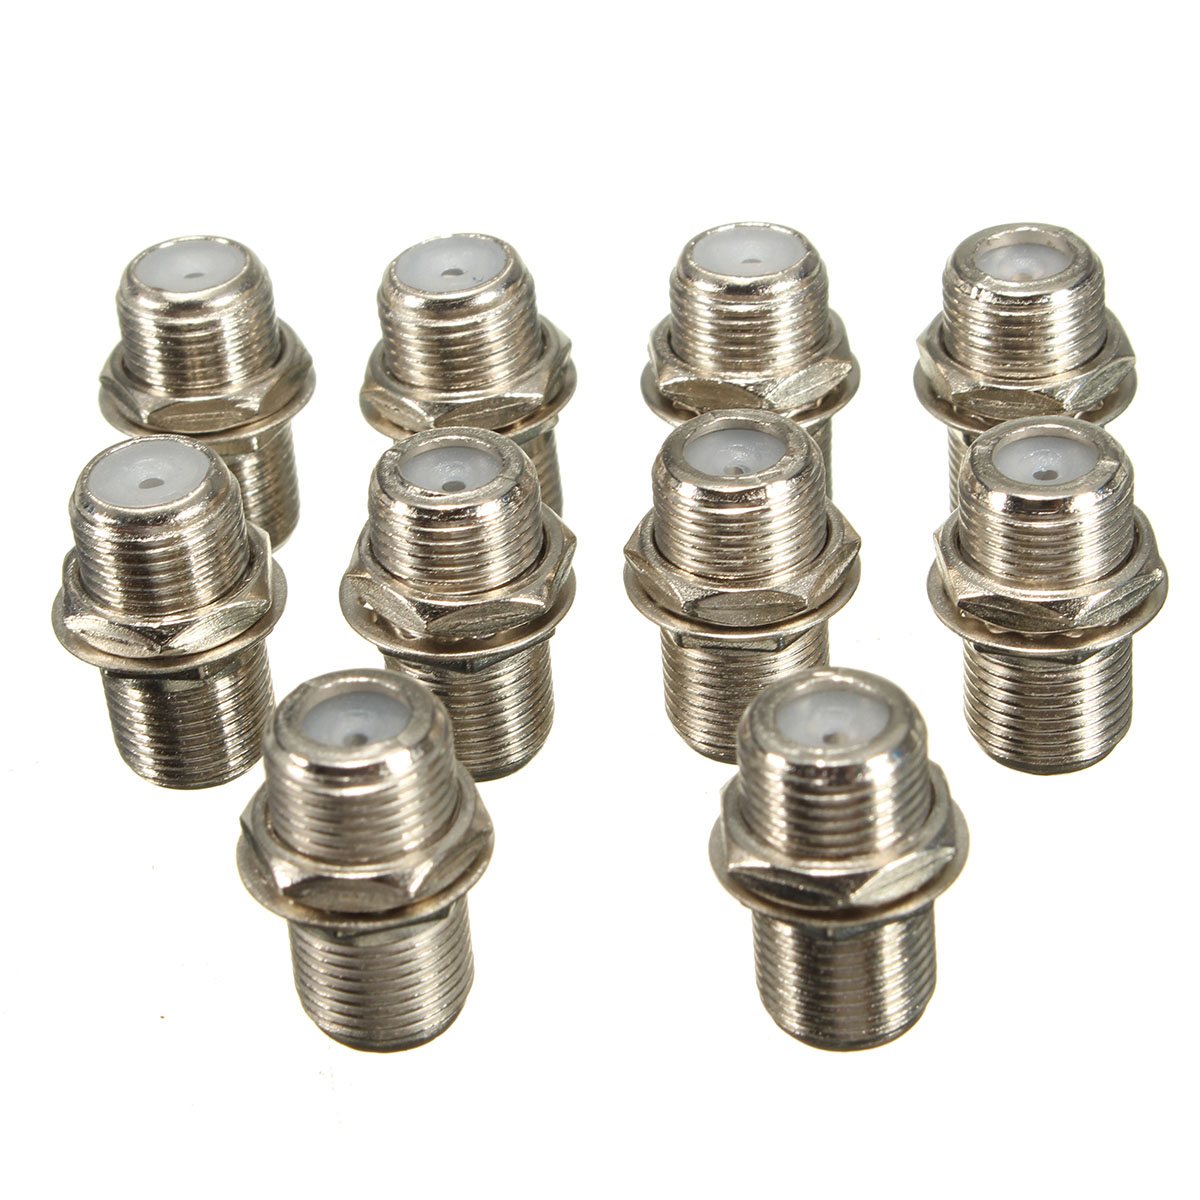 10-pcs-F-Type-Plug-Extend-Cable-TV-Coax-Coaxial-Connectors-Cable-Connector-Adapter-F-to-F-Female-1383729